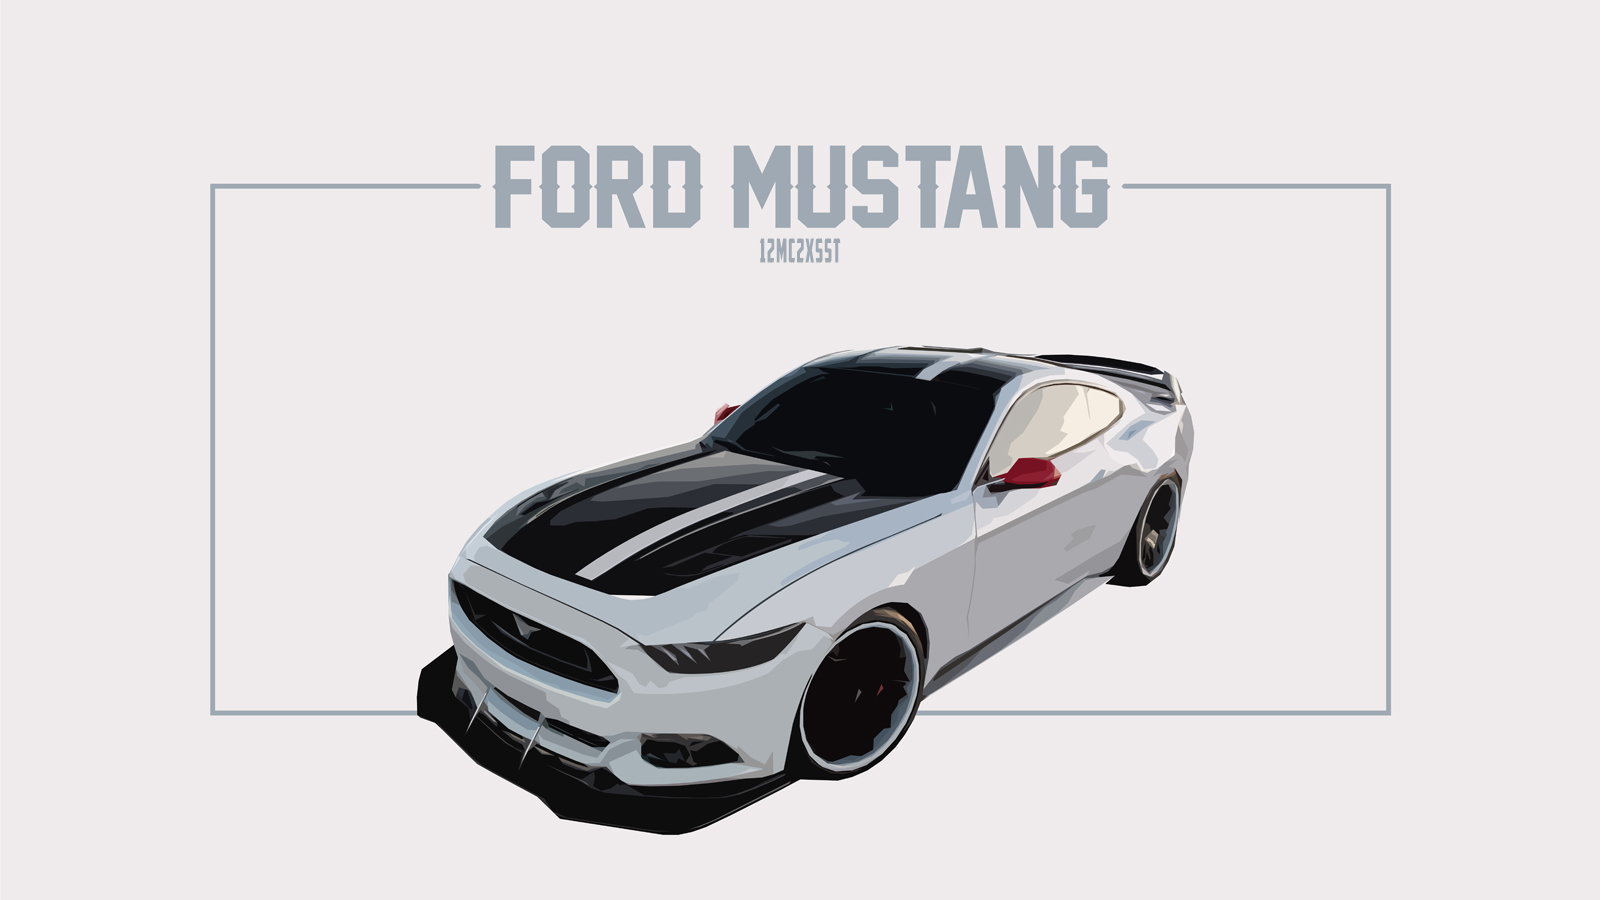 Ford Mustang Picture by zelko